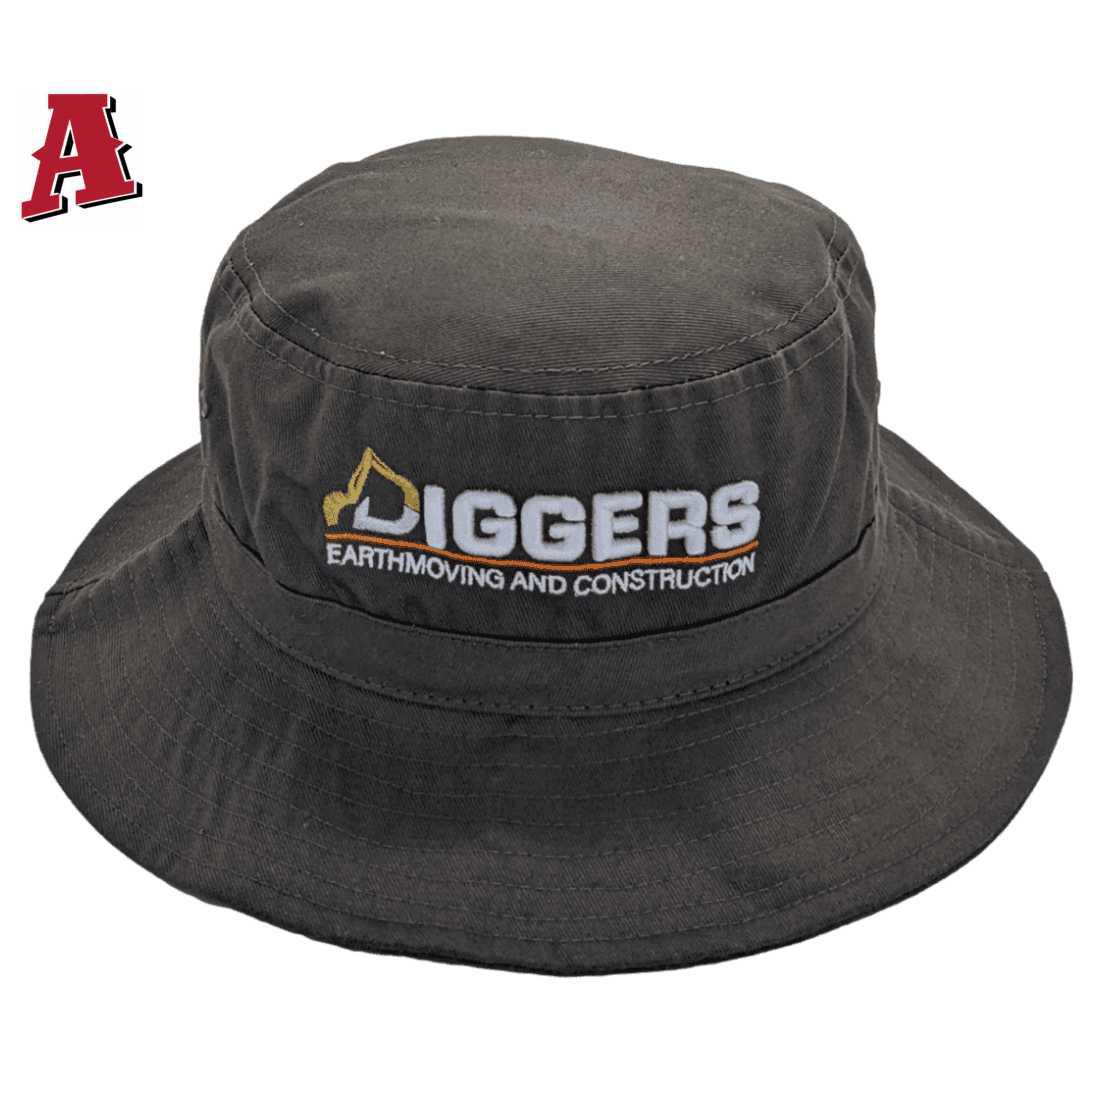 Diggers Earthmoving and Construction Segenhoe NSW Aussie Bucket Hat One Size Fits All with Optional Brim Width Charcoal